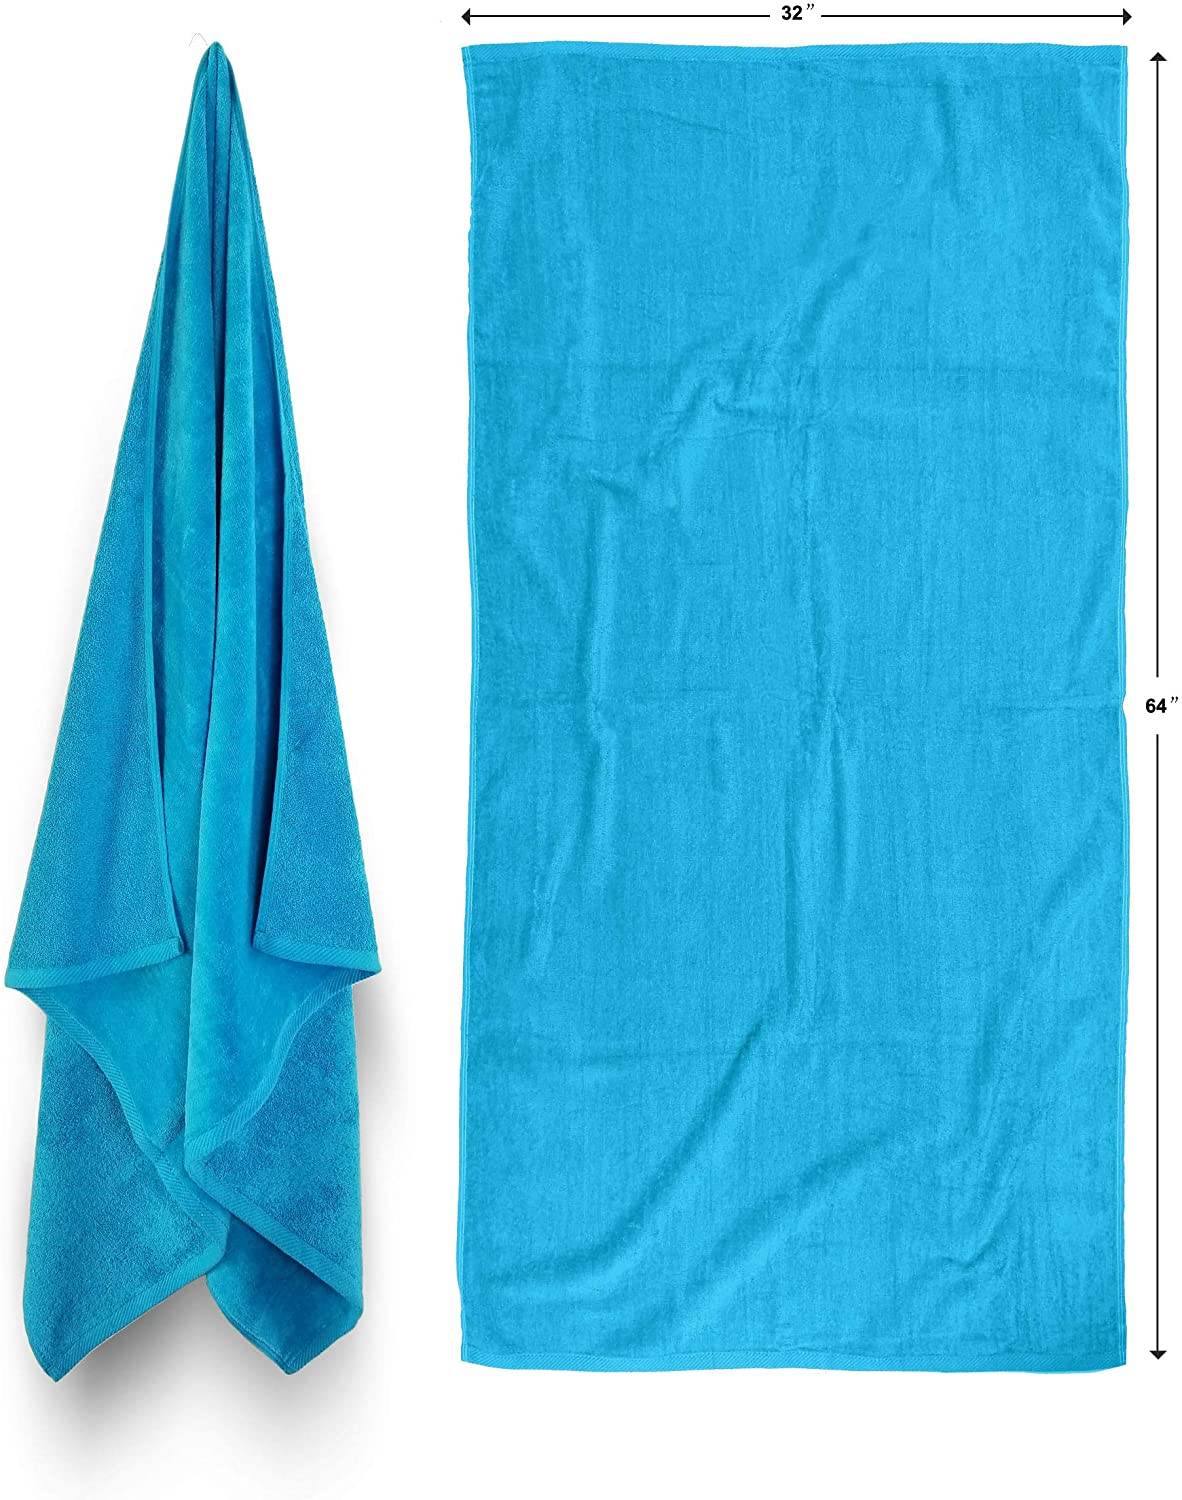 Royal Comfort and soft Solid Color Velour Terry Beach Towel with bright colors, made of 100% cotton. Featured Image